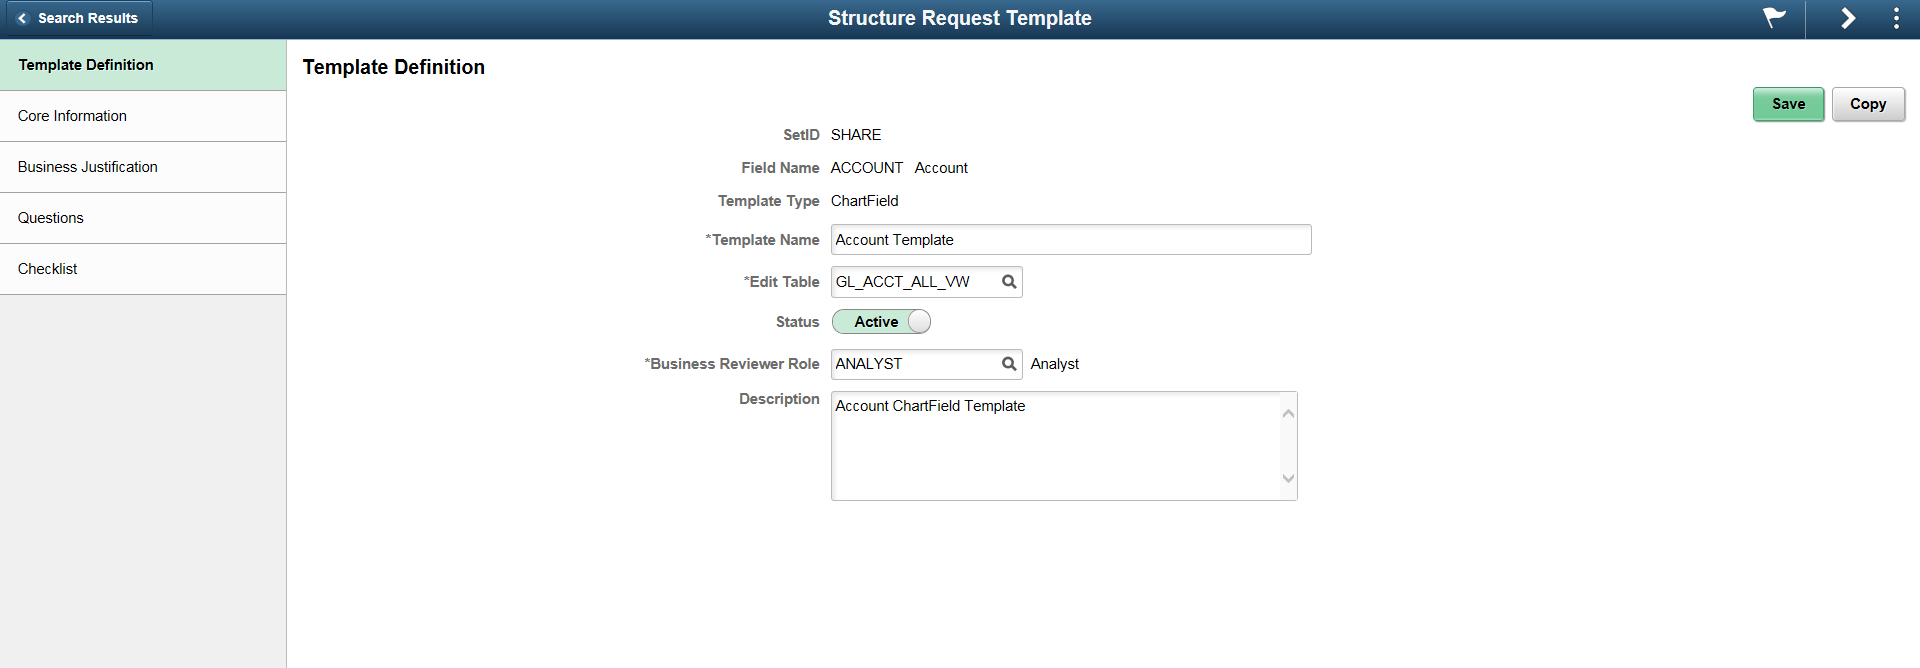 Structure Request Template page